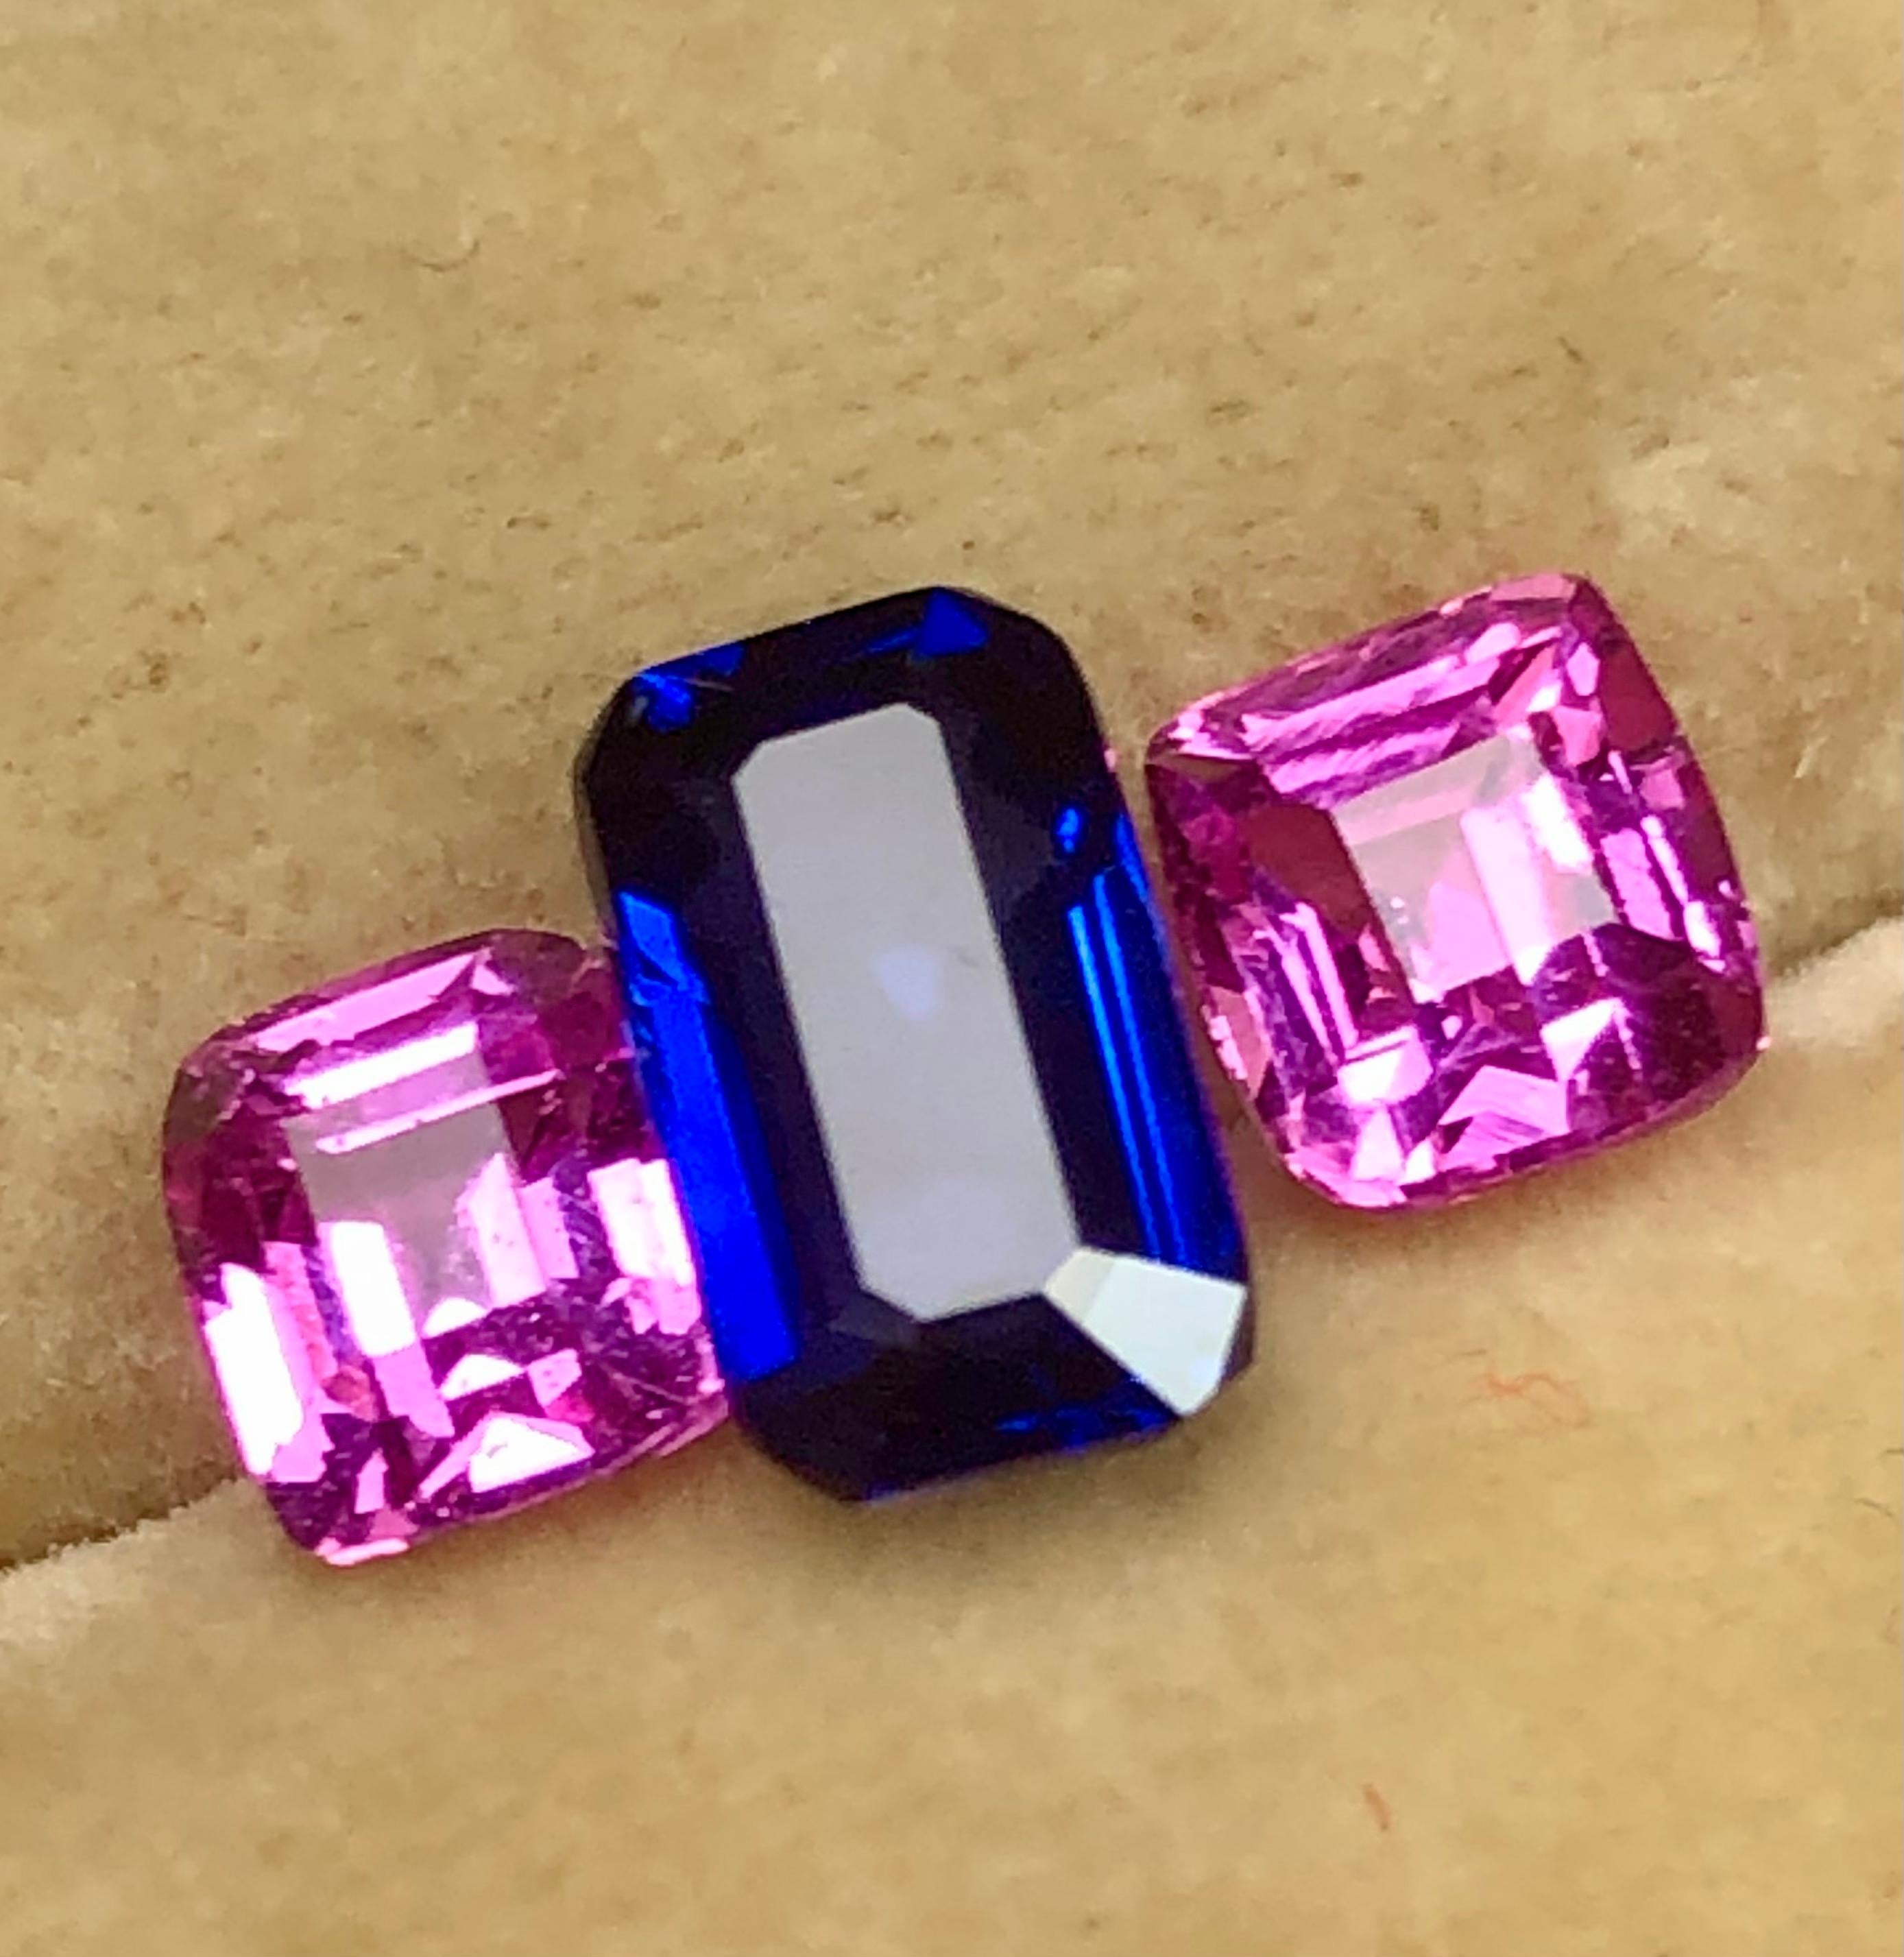 A center high-quality emerald cut royal blue Ceylon sapphire 1.30 carats and two vibrant, vivid pink Ceylon cushion cut sapphires weighing 1.60 carats. 
The trio of sapphires is of extremely fine quality and clarity, with excellent cutting